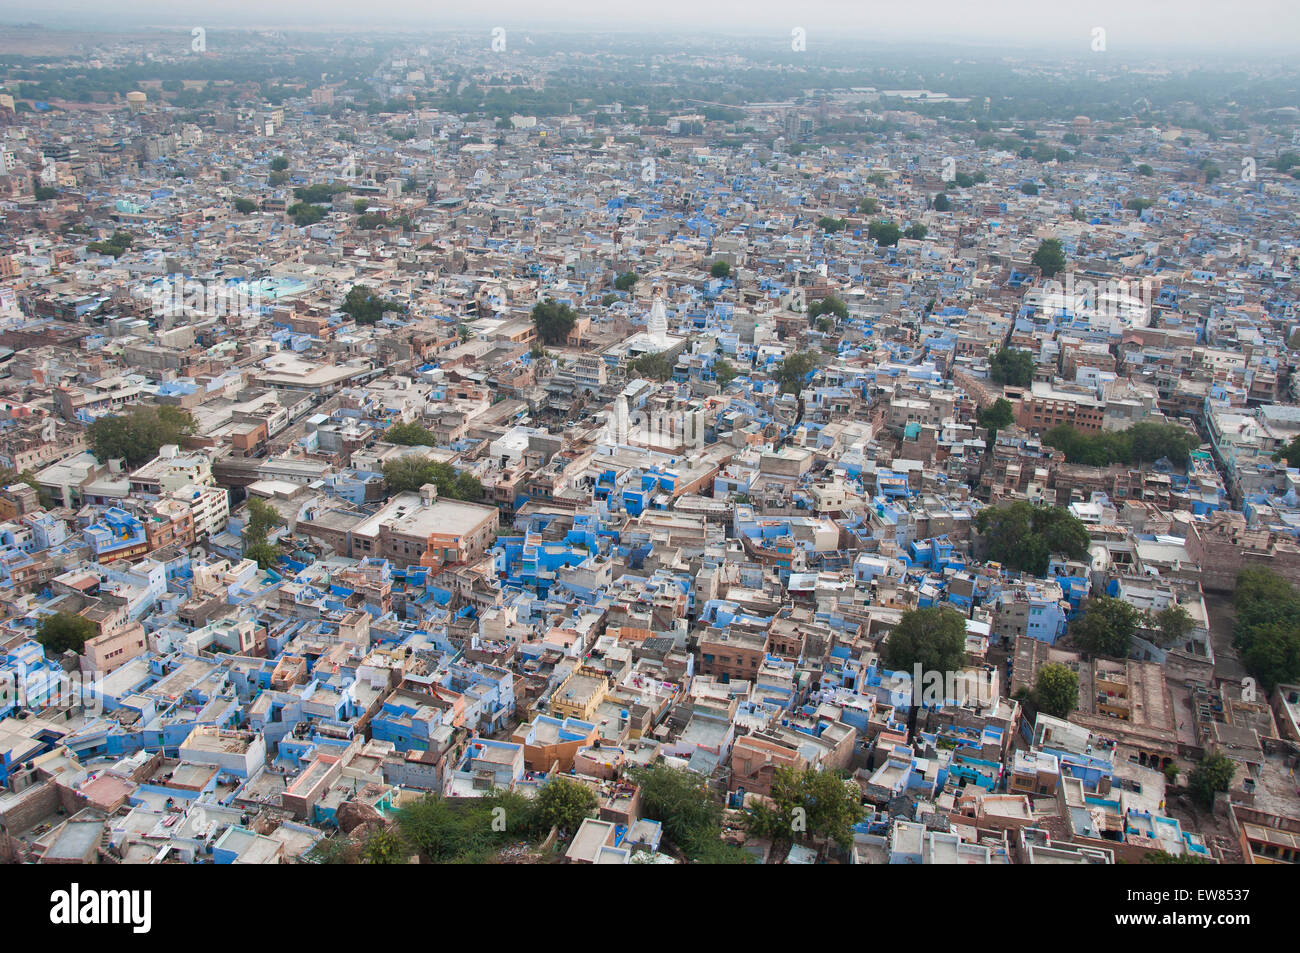 Arial view of houses in Jodhpur city, Rajasthan, India. Stock Photo